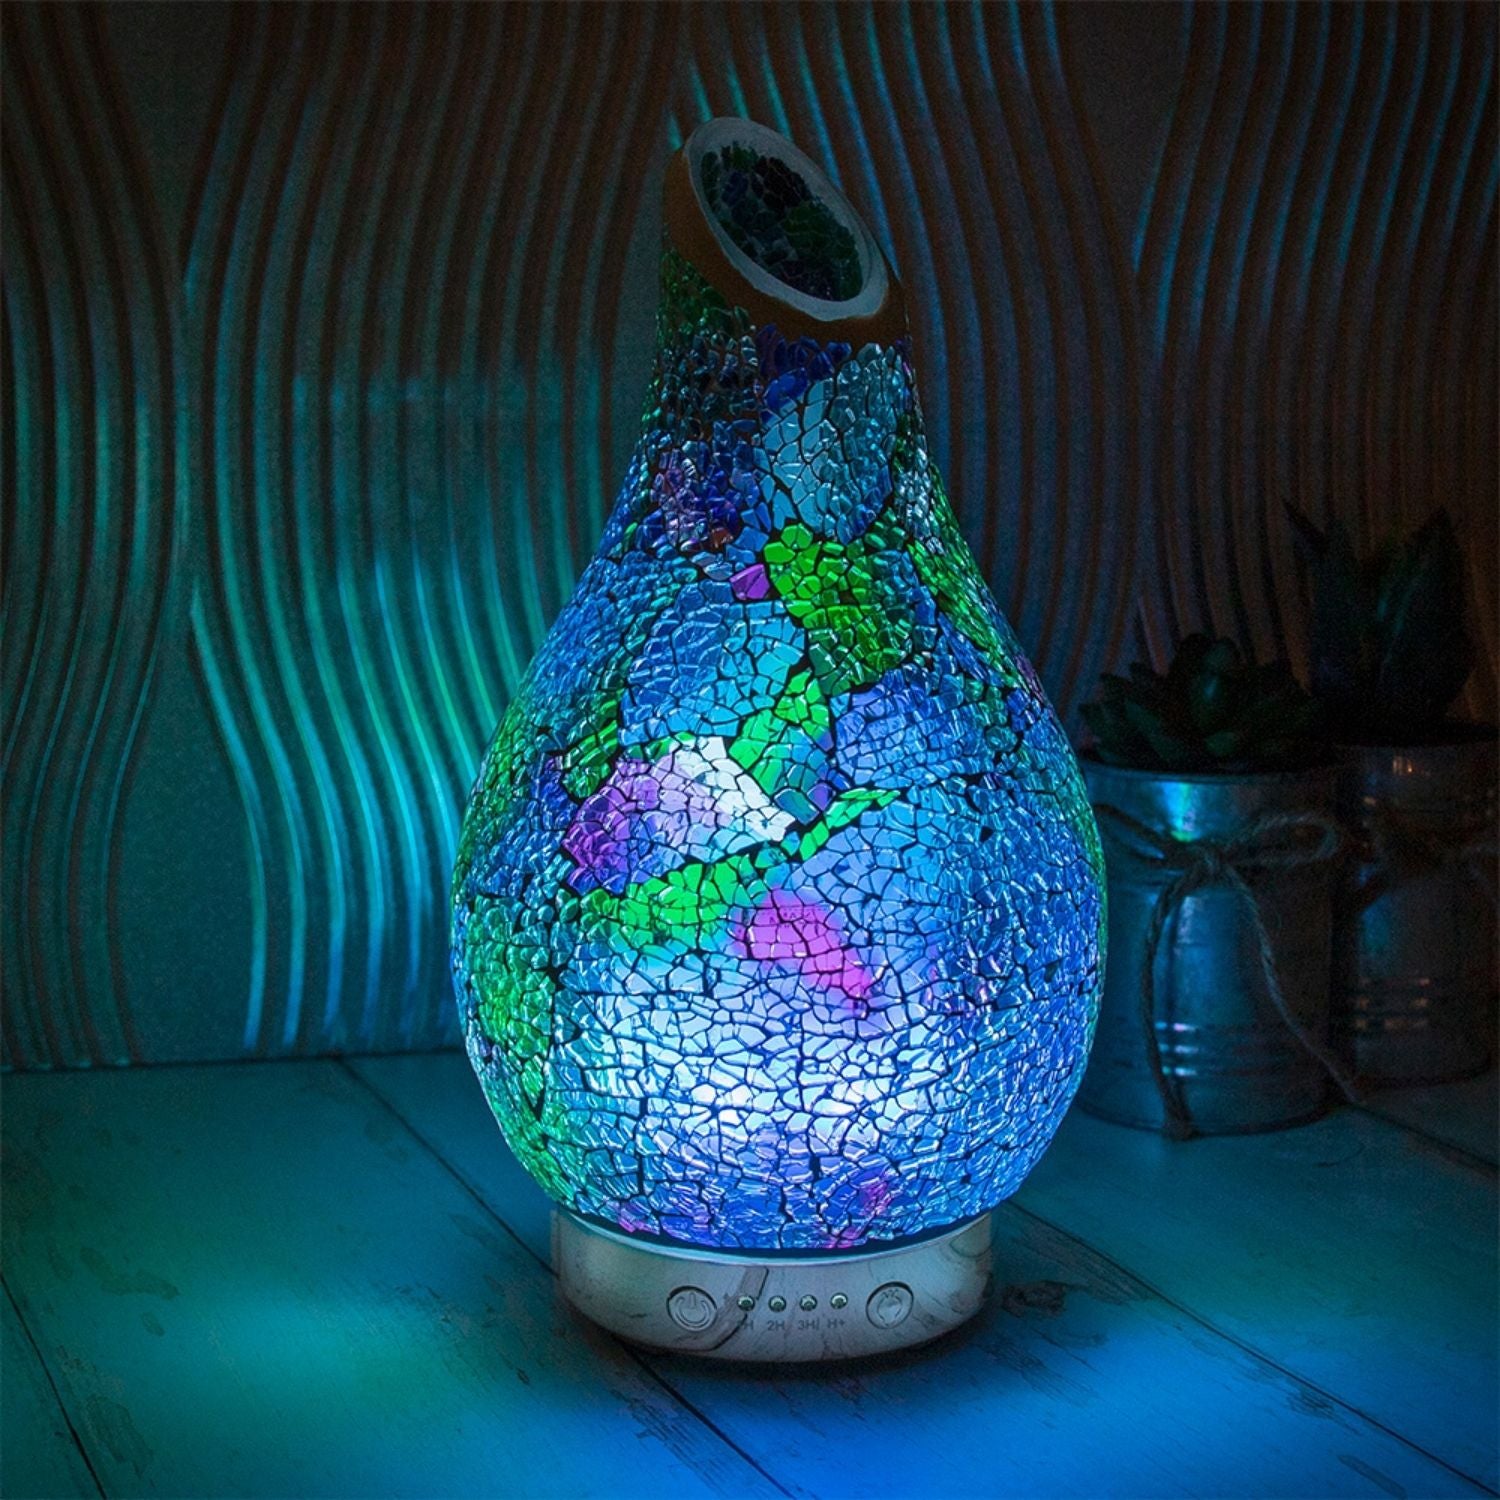 Desire Mosaic Humidifier - Multi 1 Shaws Department Stores